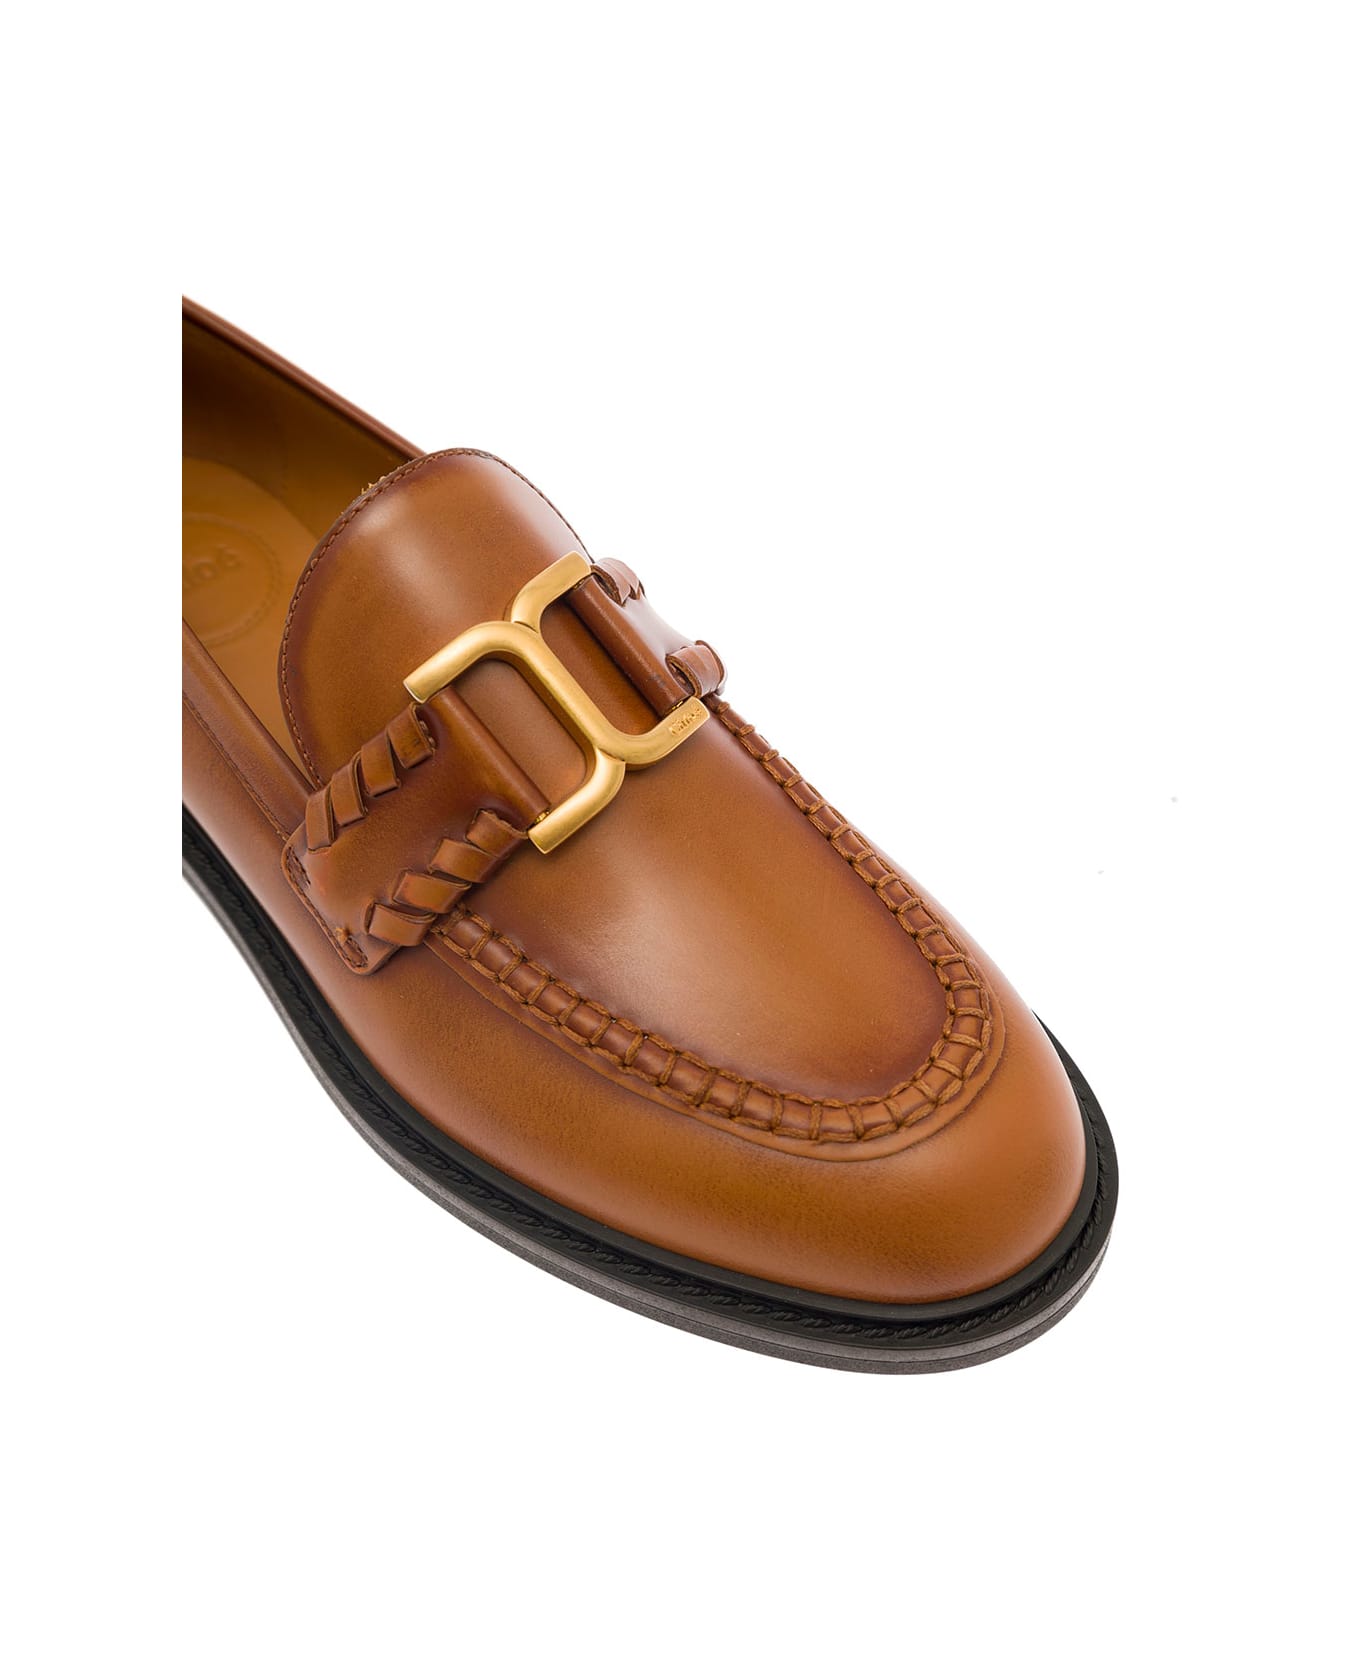 Chloé 'marcie' Brown Loafers With Gold-colored Metal Logo In Smooth Leather Woman - Brown フラットシューズ